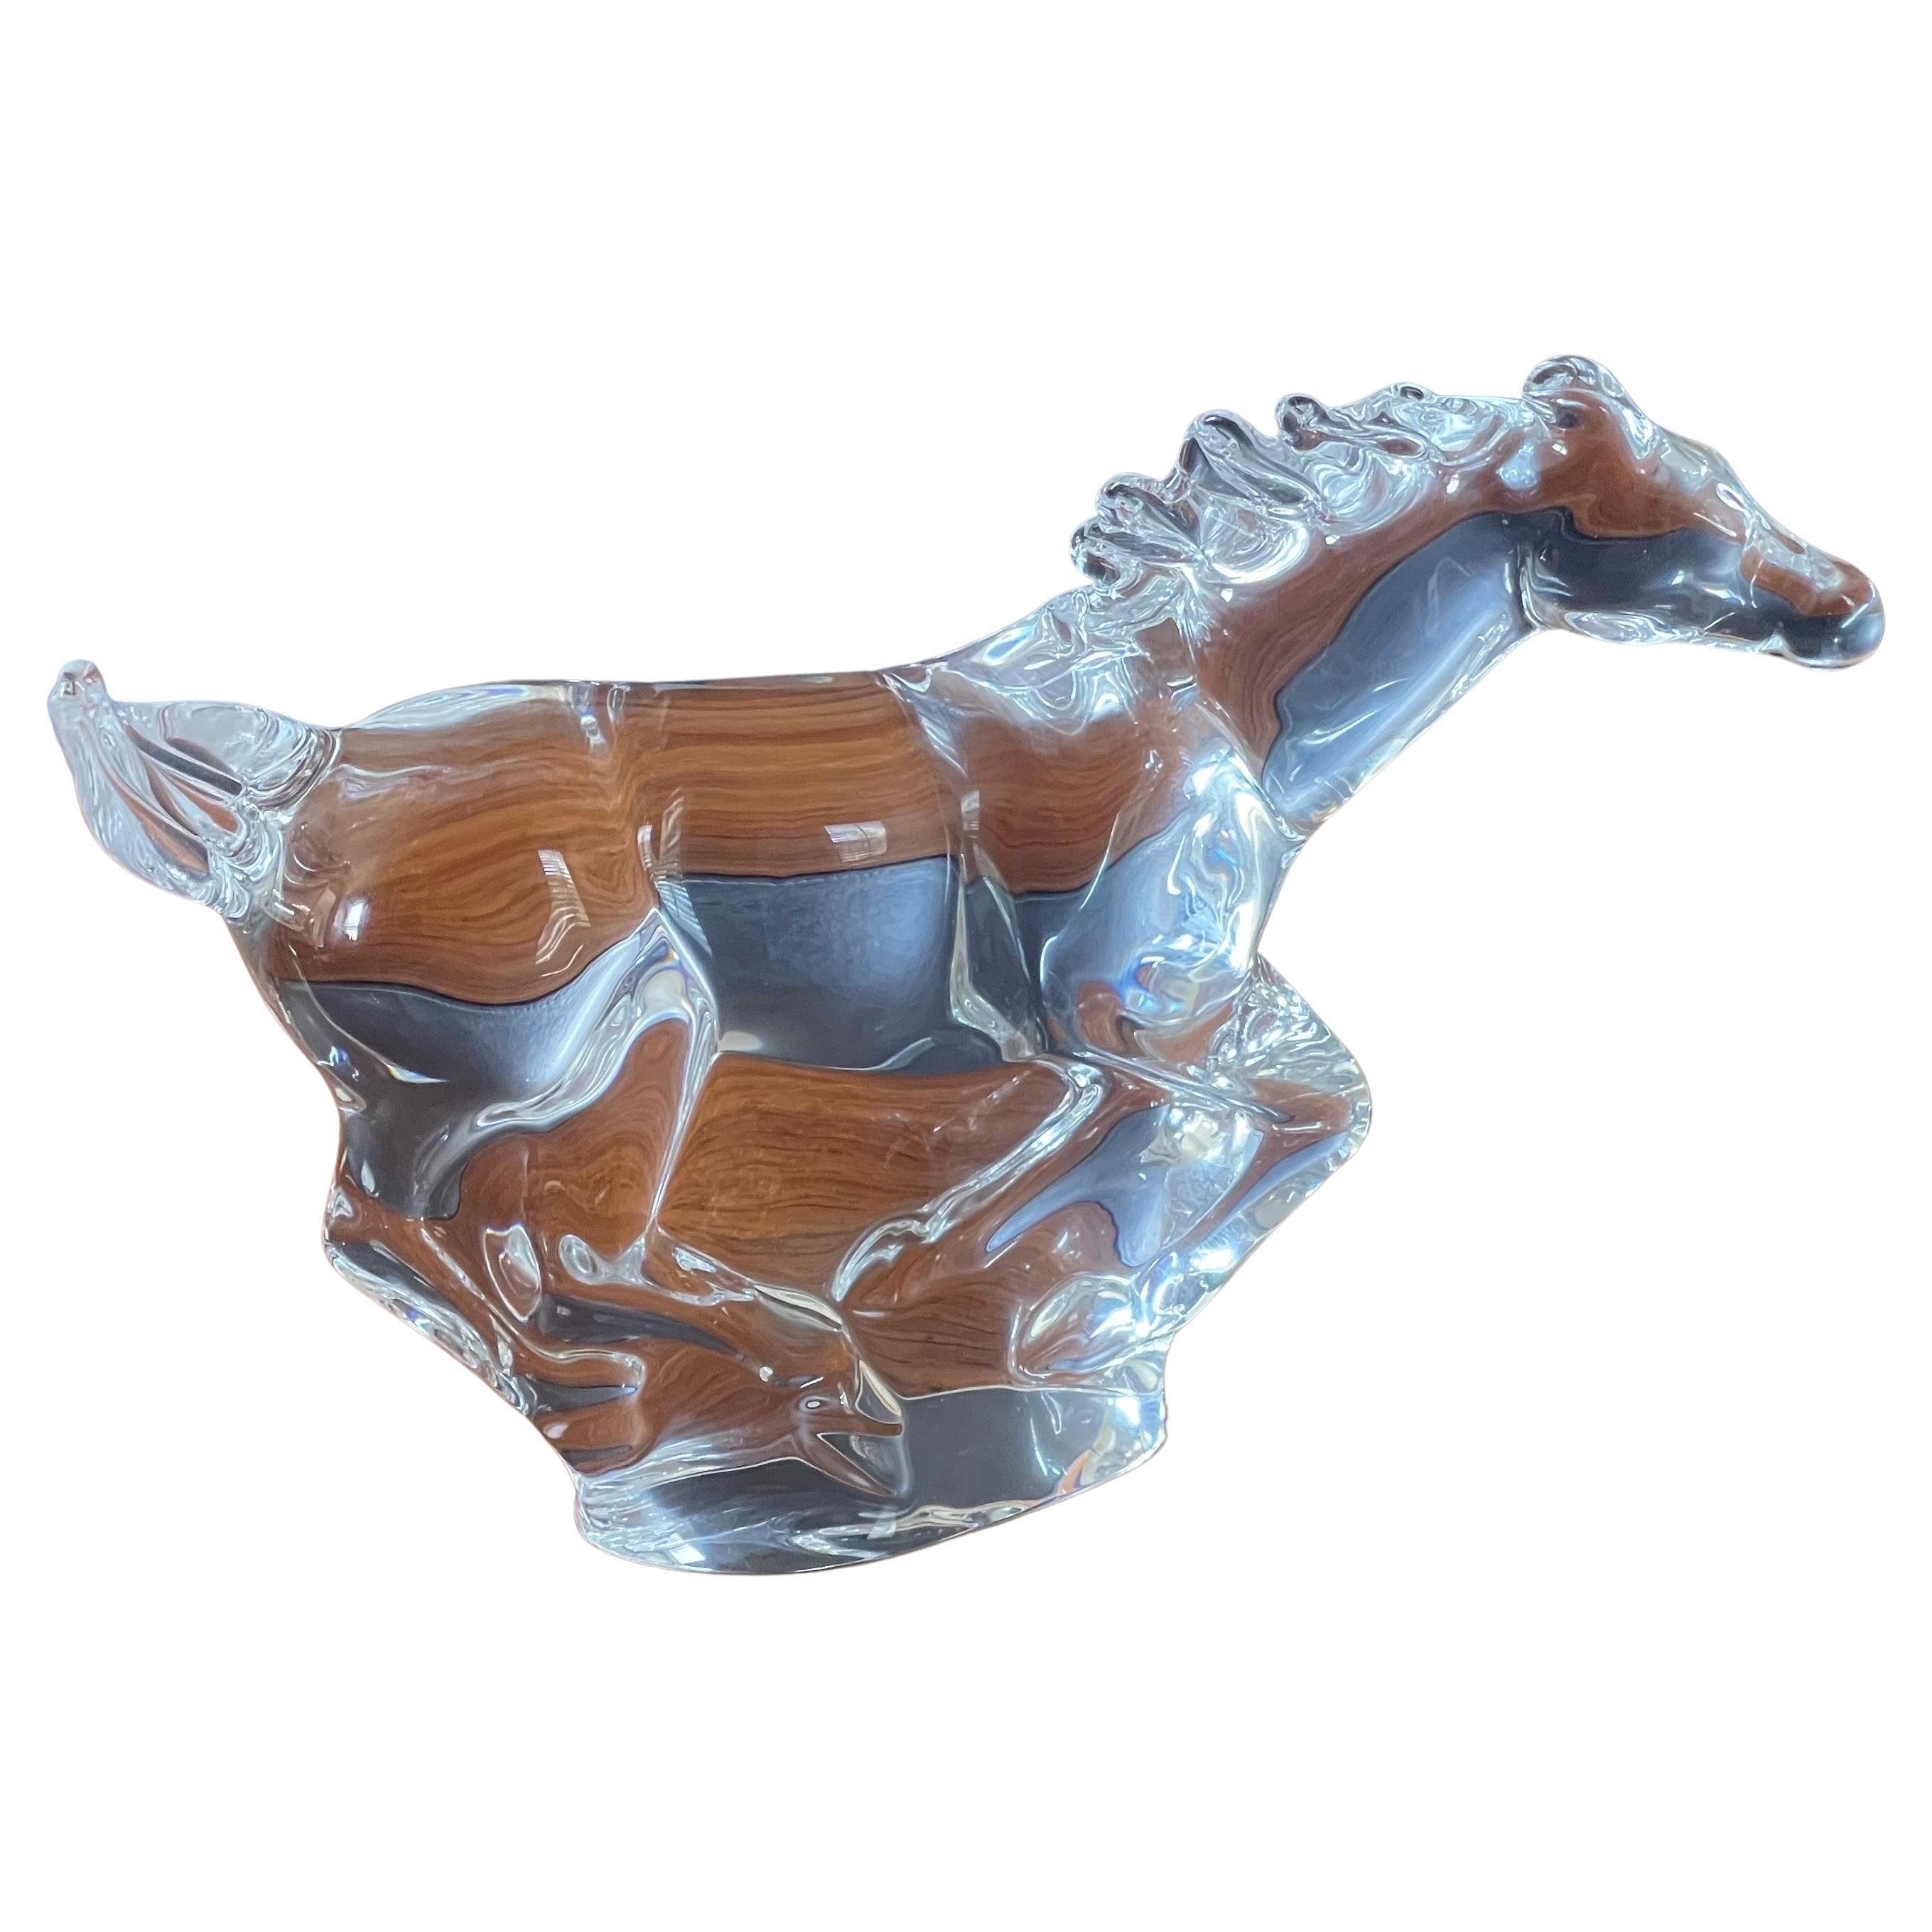 Crystal Galloping Horse / Mustang Sculpture by Steuben Glassworks